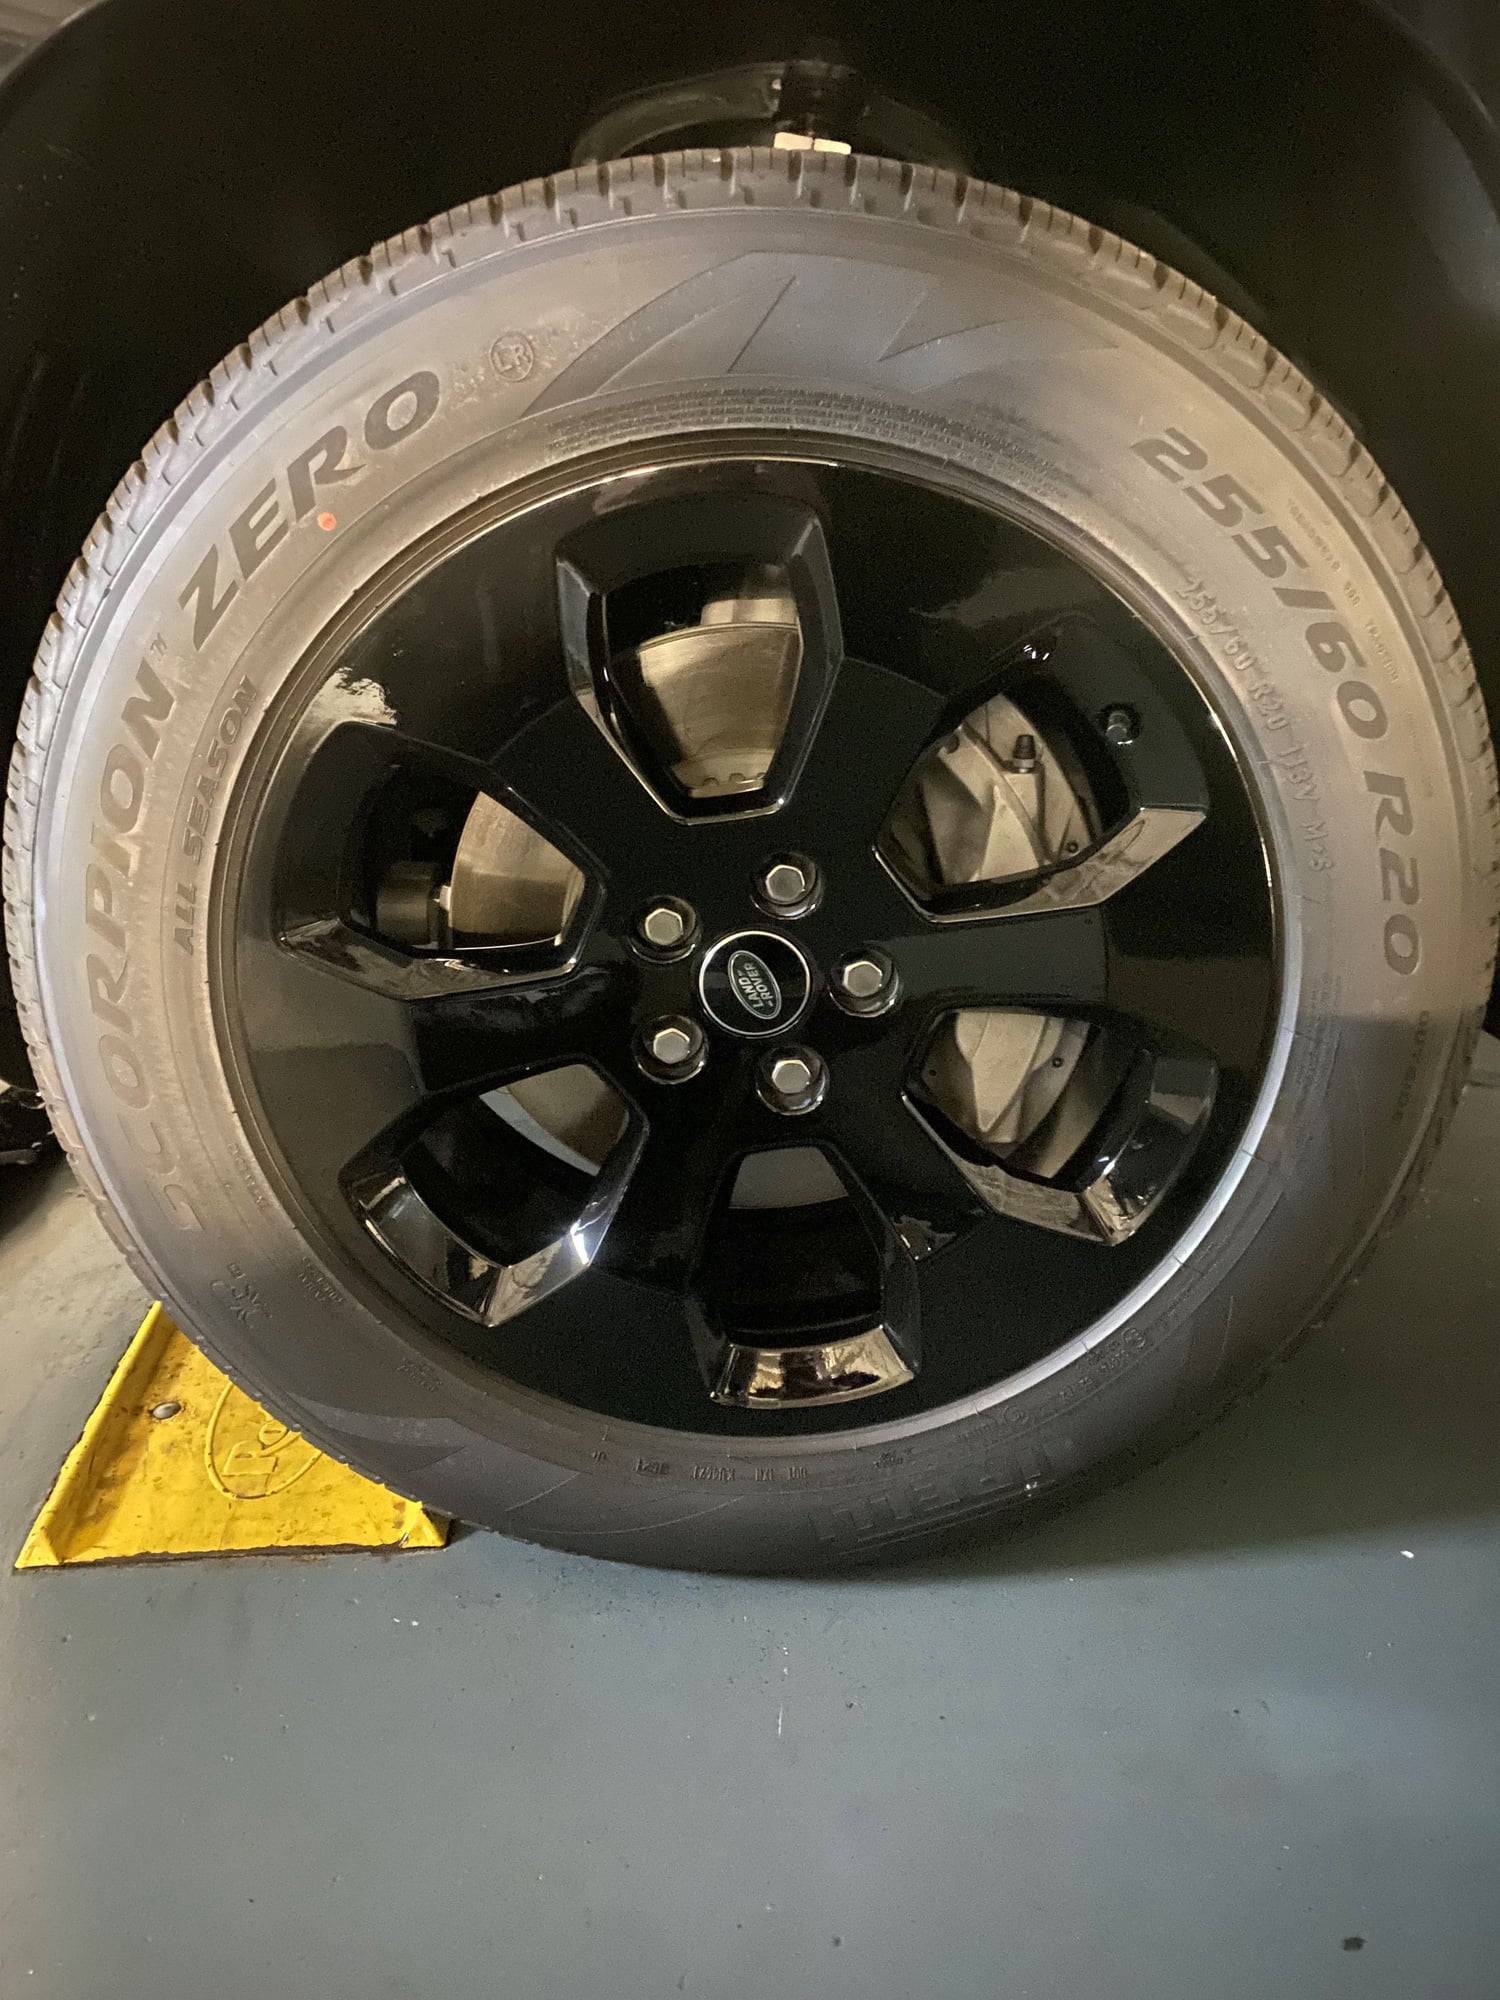 Wheels and Tires/Axles - $2500 - 2022 20" 6011 Style Gloss Black Wheels and Tires (5) - New - 0  All Models - Miami Beach, FL 33139, United States